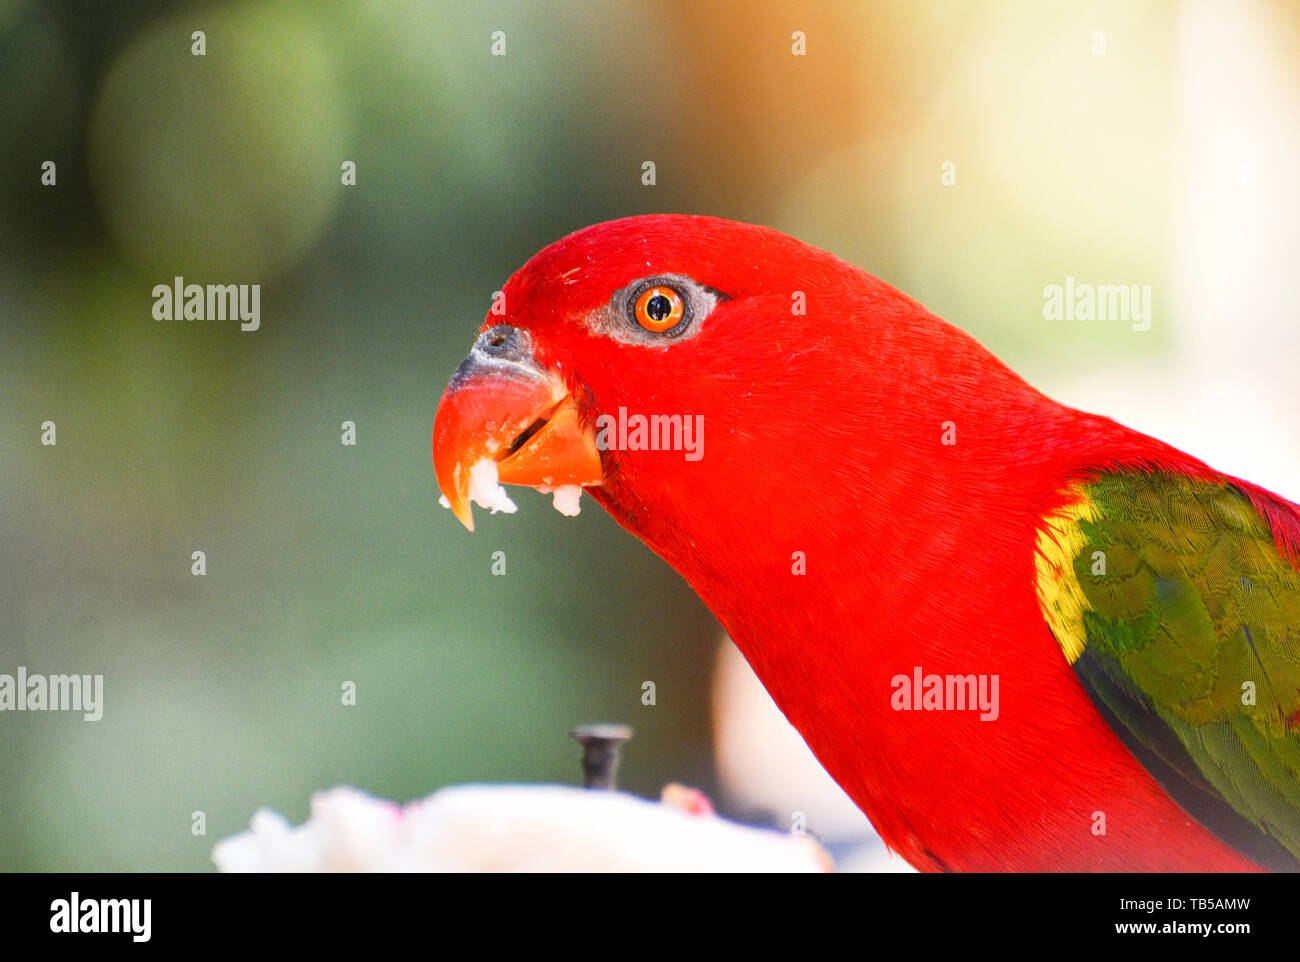 Chattering Lory parrot standing on branch tree nuture green background / beautiful red parrot bird Stock Photo